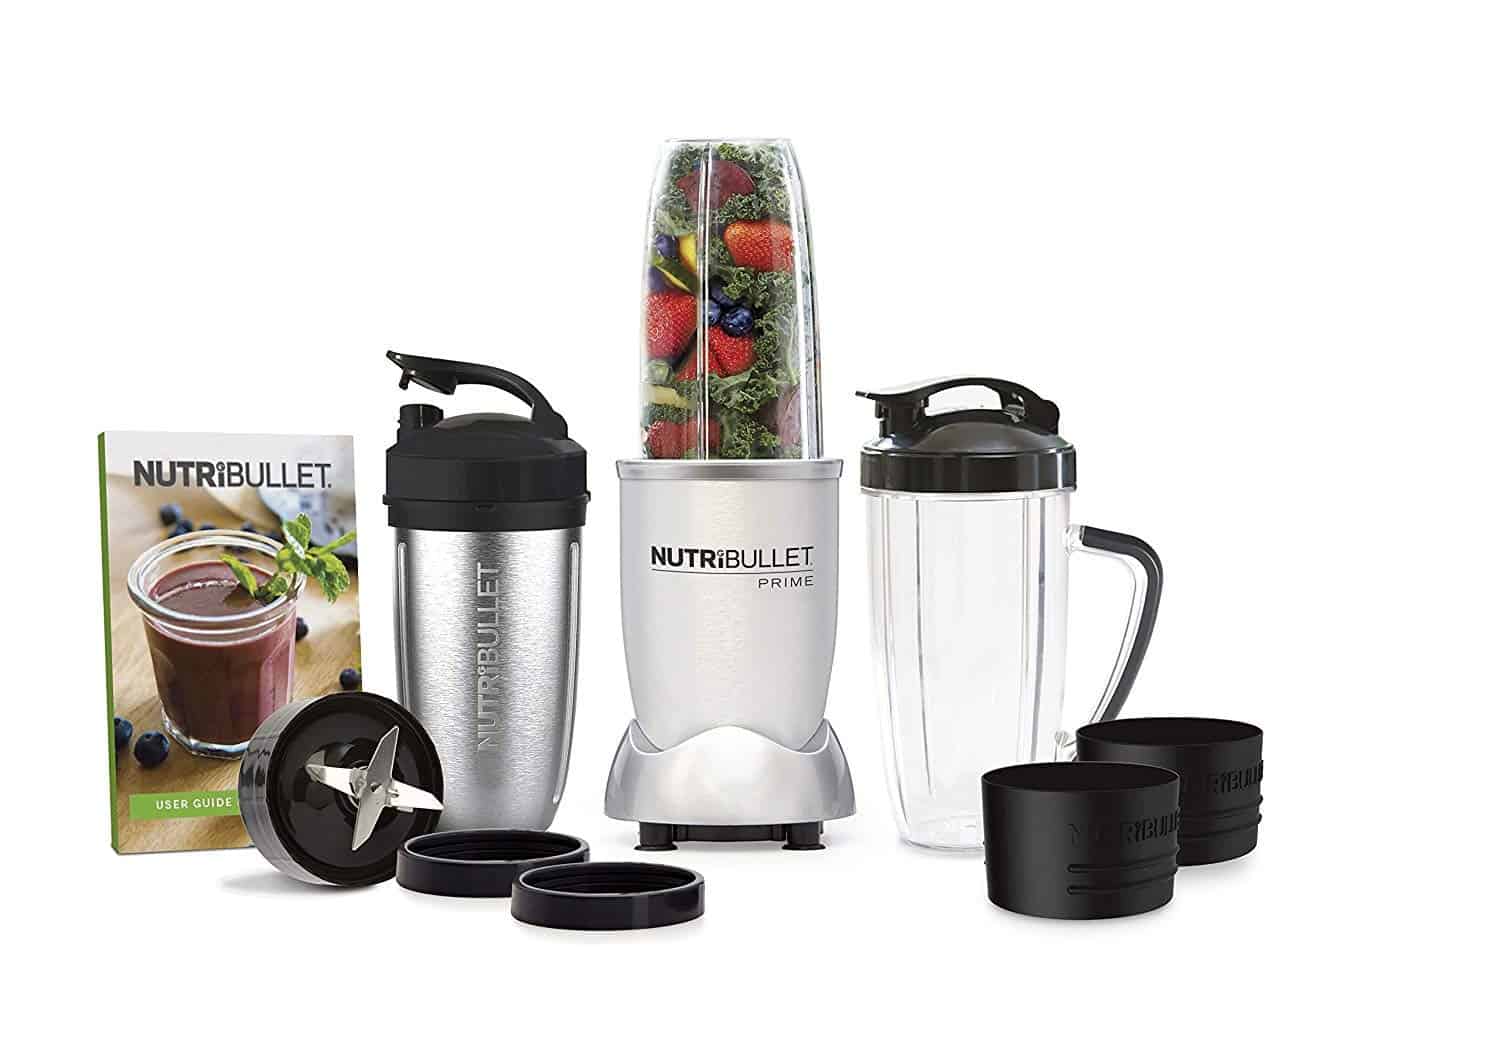 which is the best nutribullet